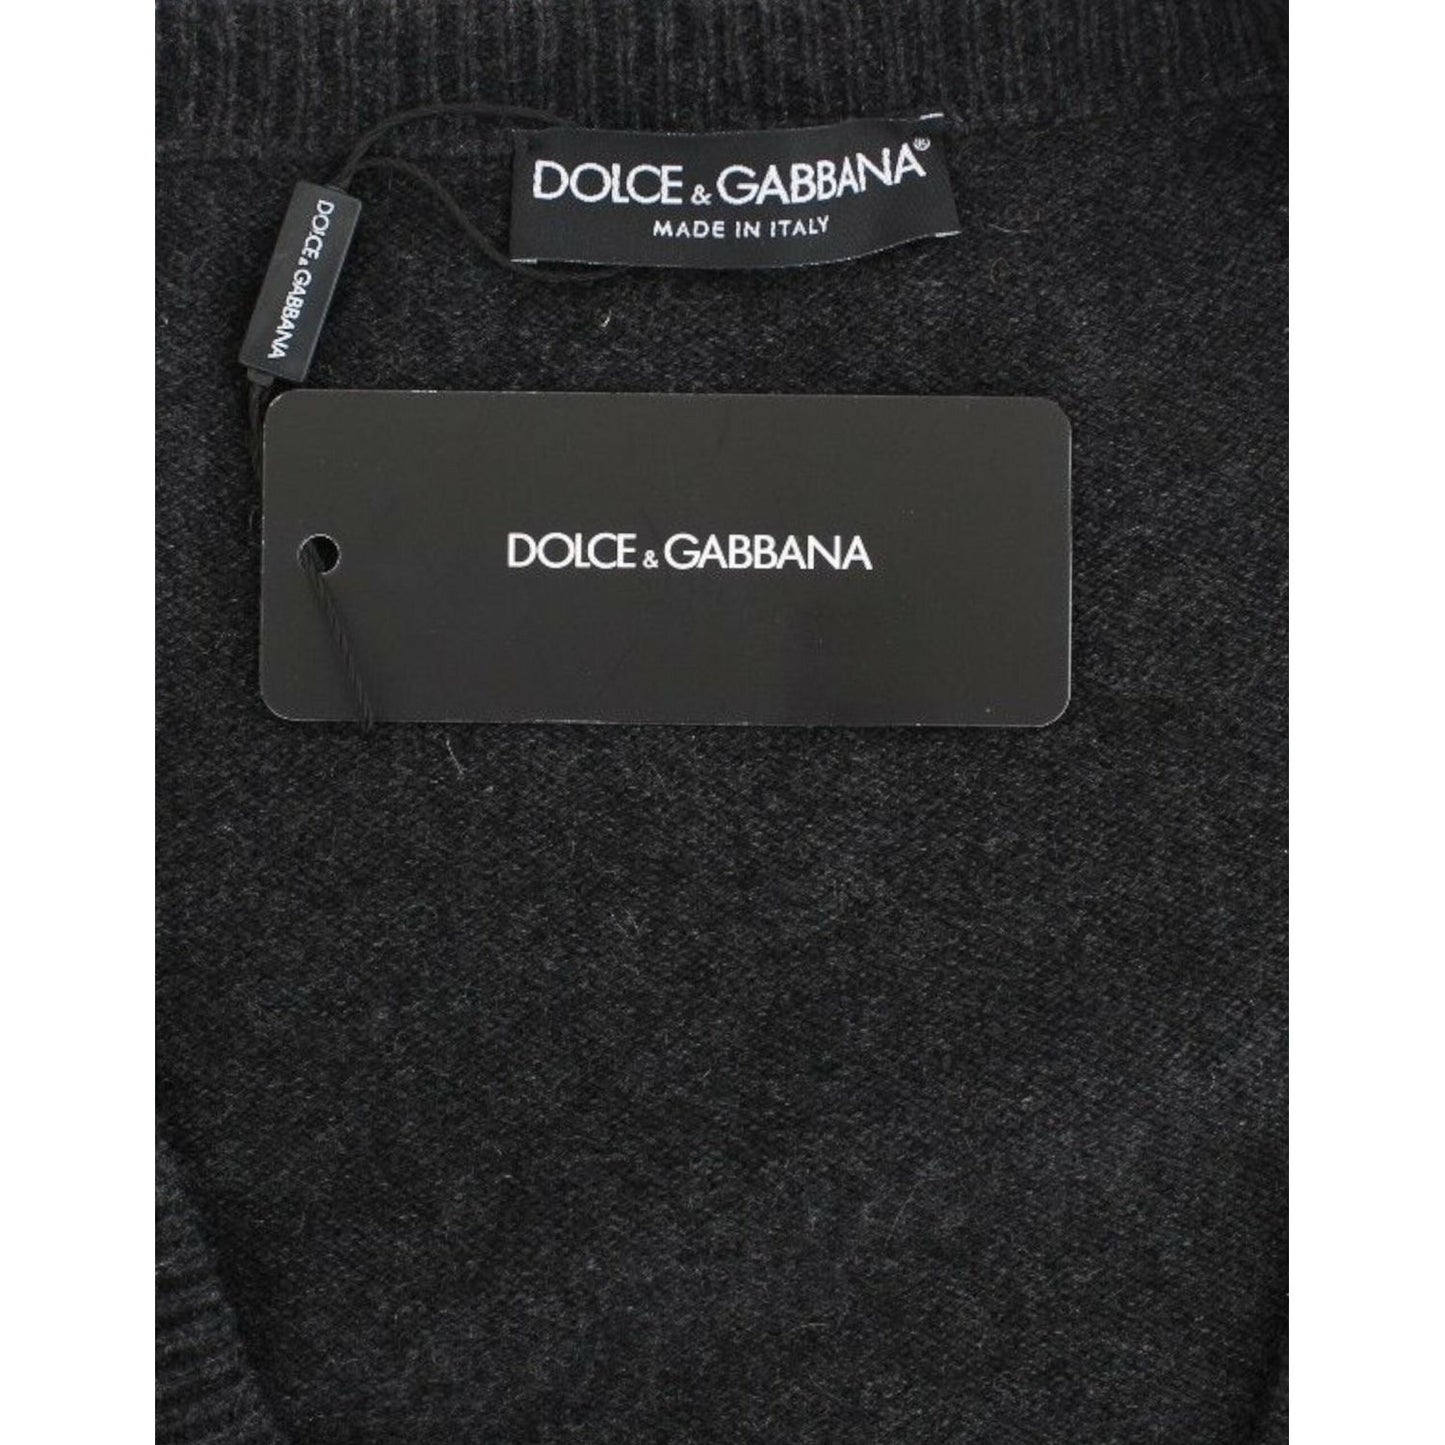 Dolce & Gabbana Chic Gray Oversize Knitted Cashmere Pullover gray-cashmere-sweater-pullover-wrap